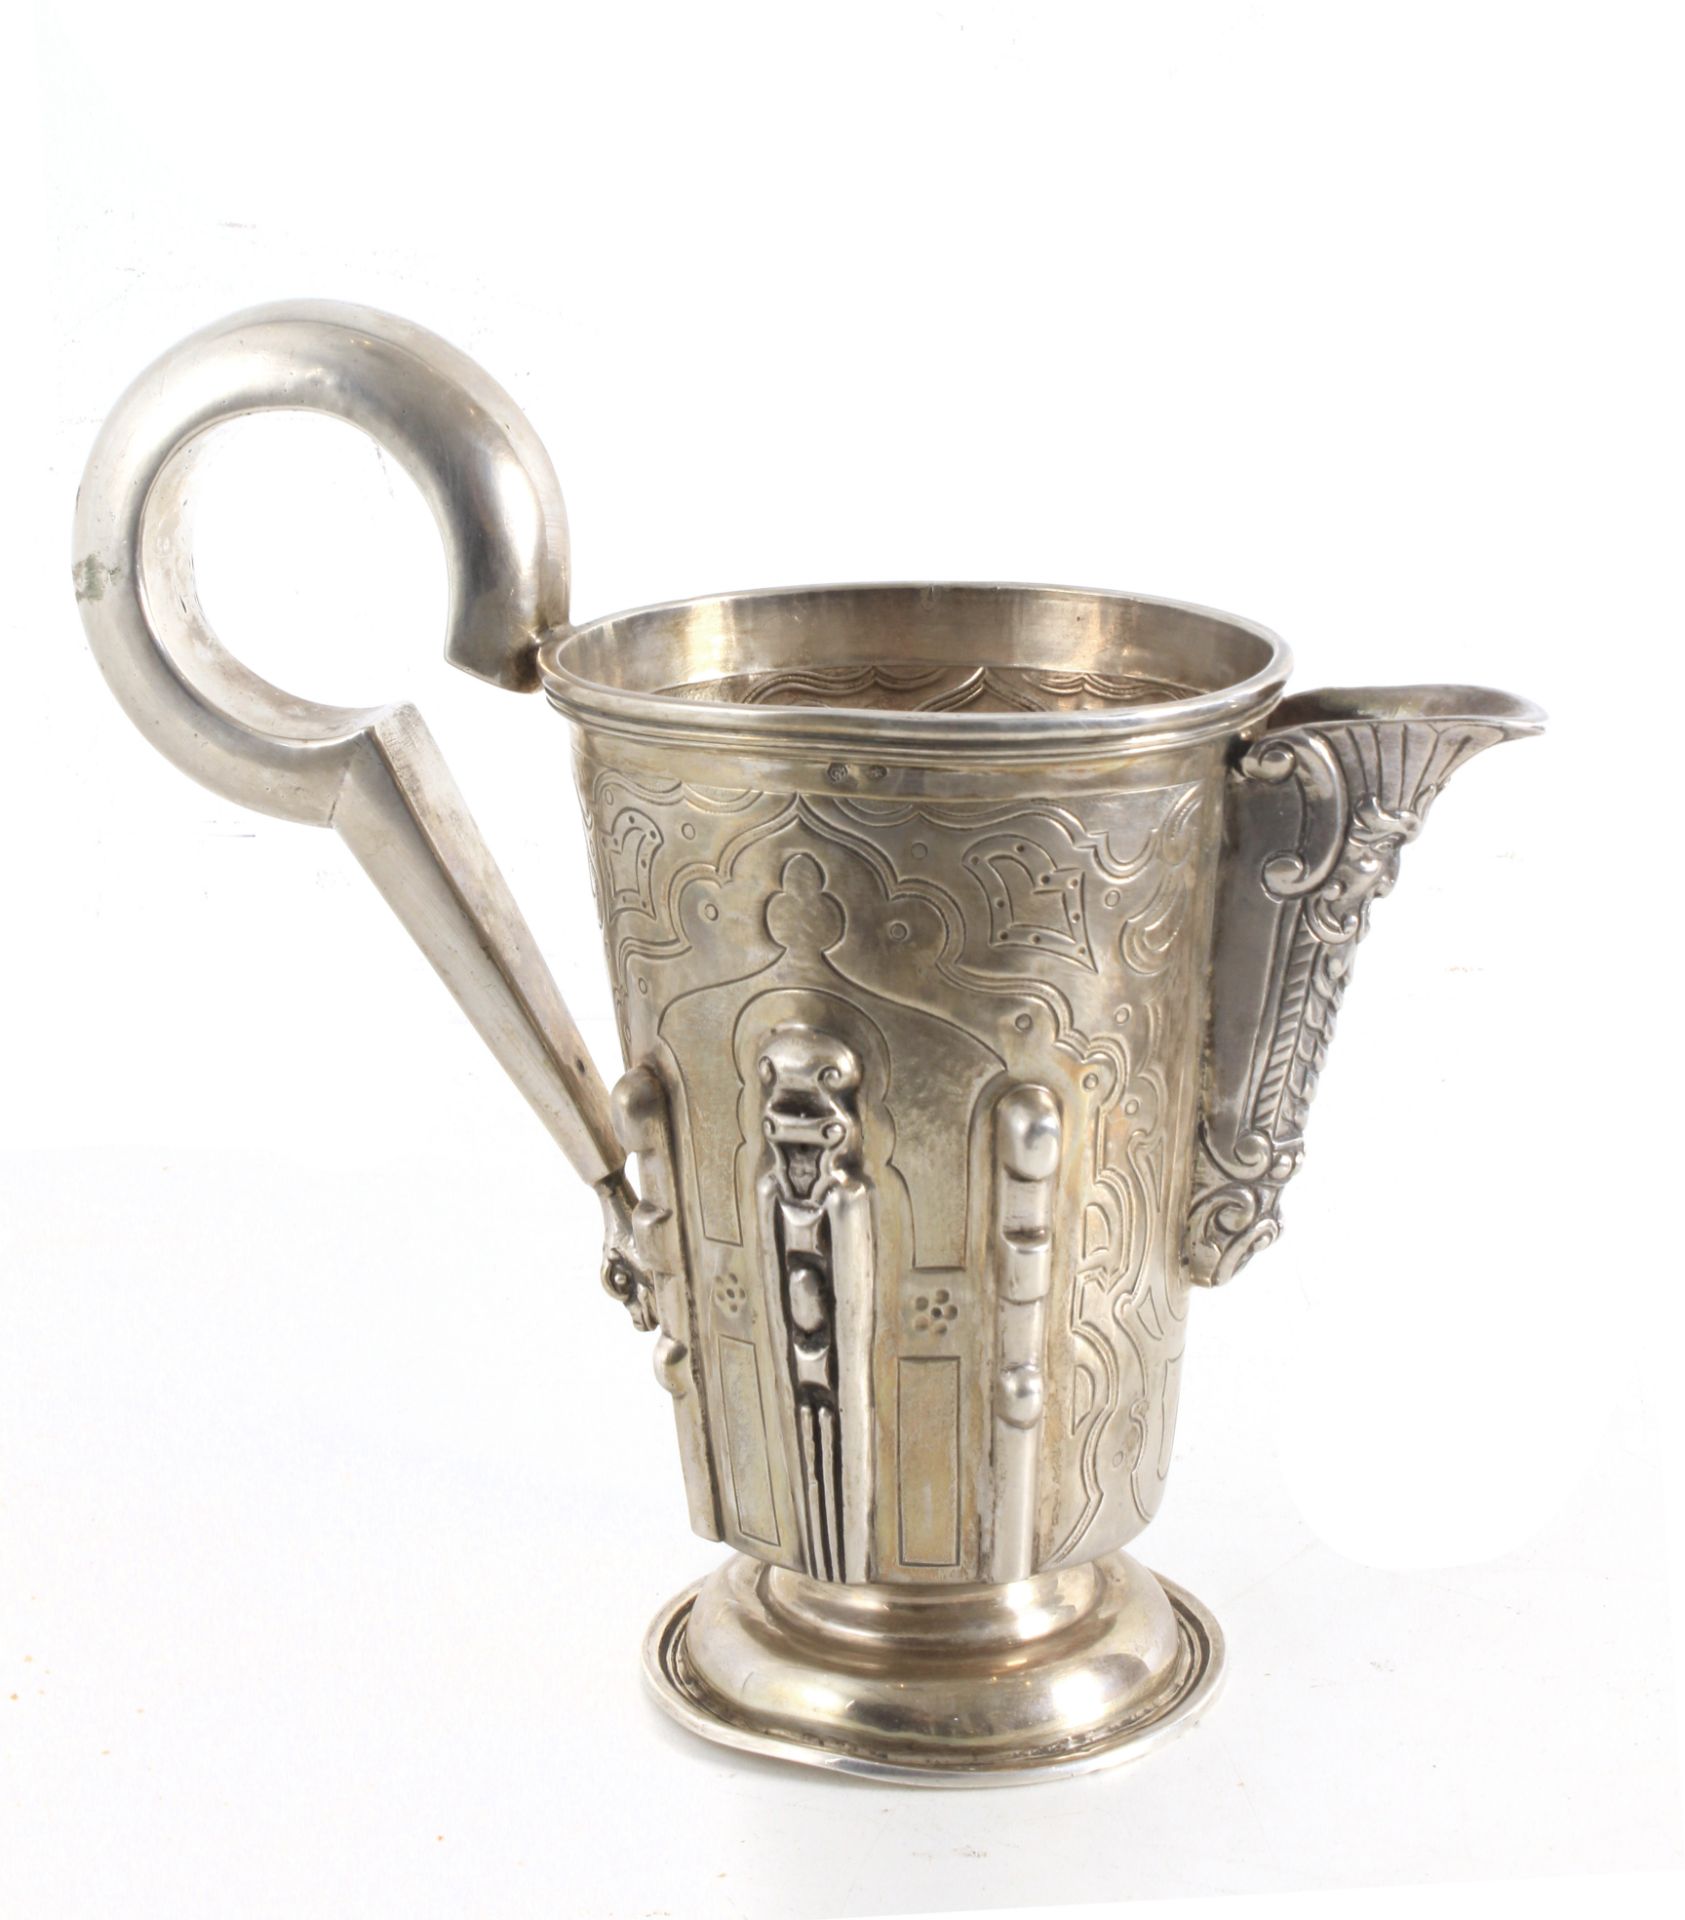 A 20th century silver pitcher